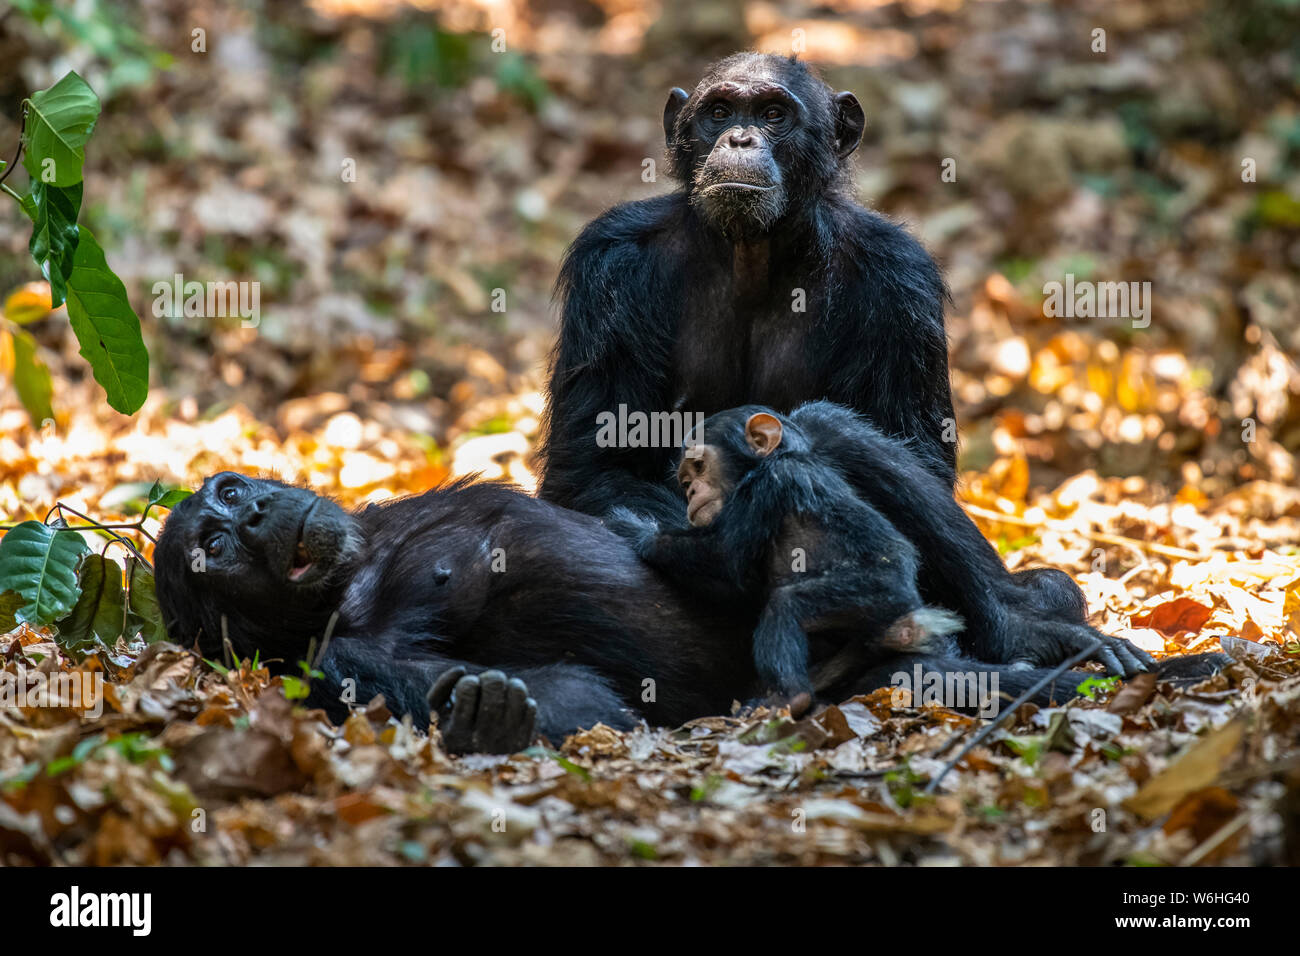 Female Chimpanzee (Pan troglodytes) lying on her back cradles her baby while another female Chimpanzee looks on in Mahale Mountains National Park o... Stock Photo